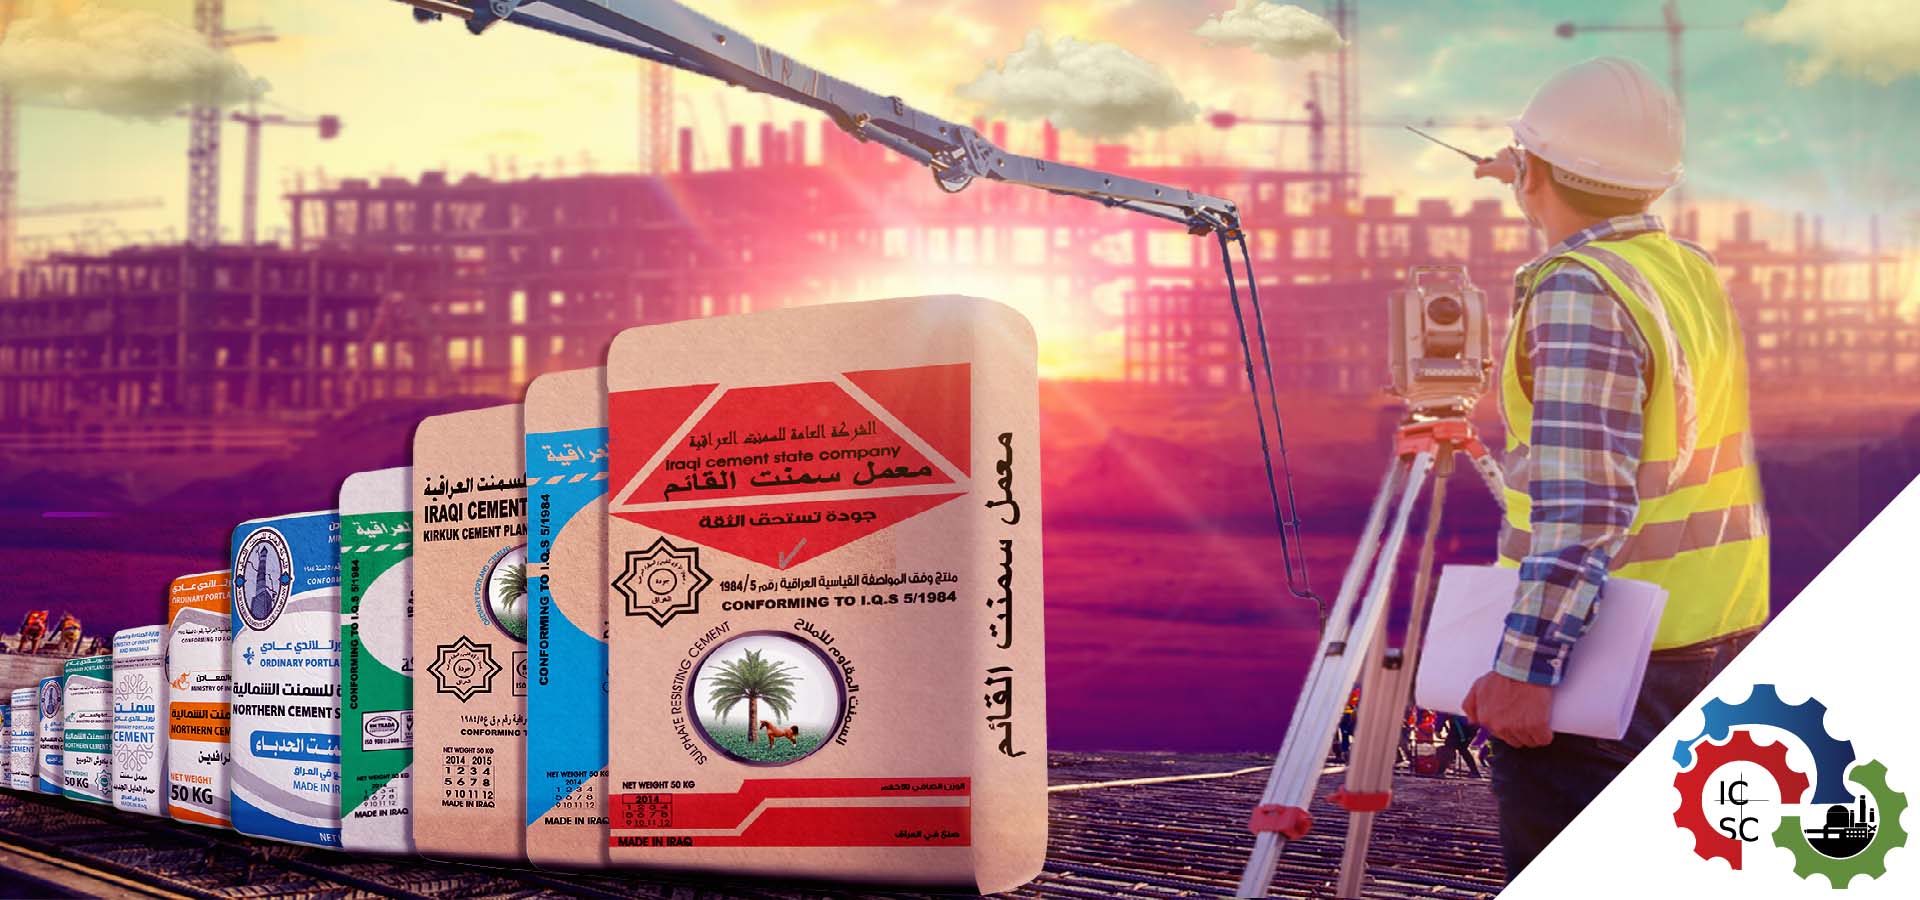 The General Company for Iraqi Cement